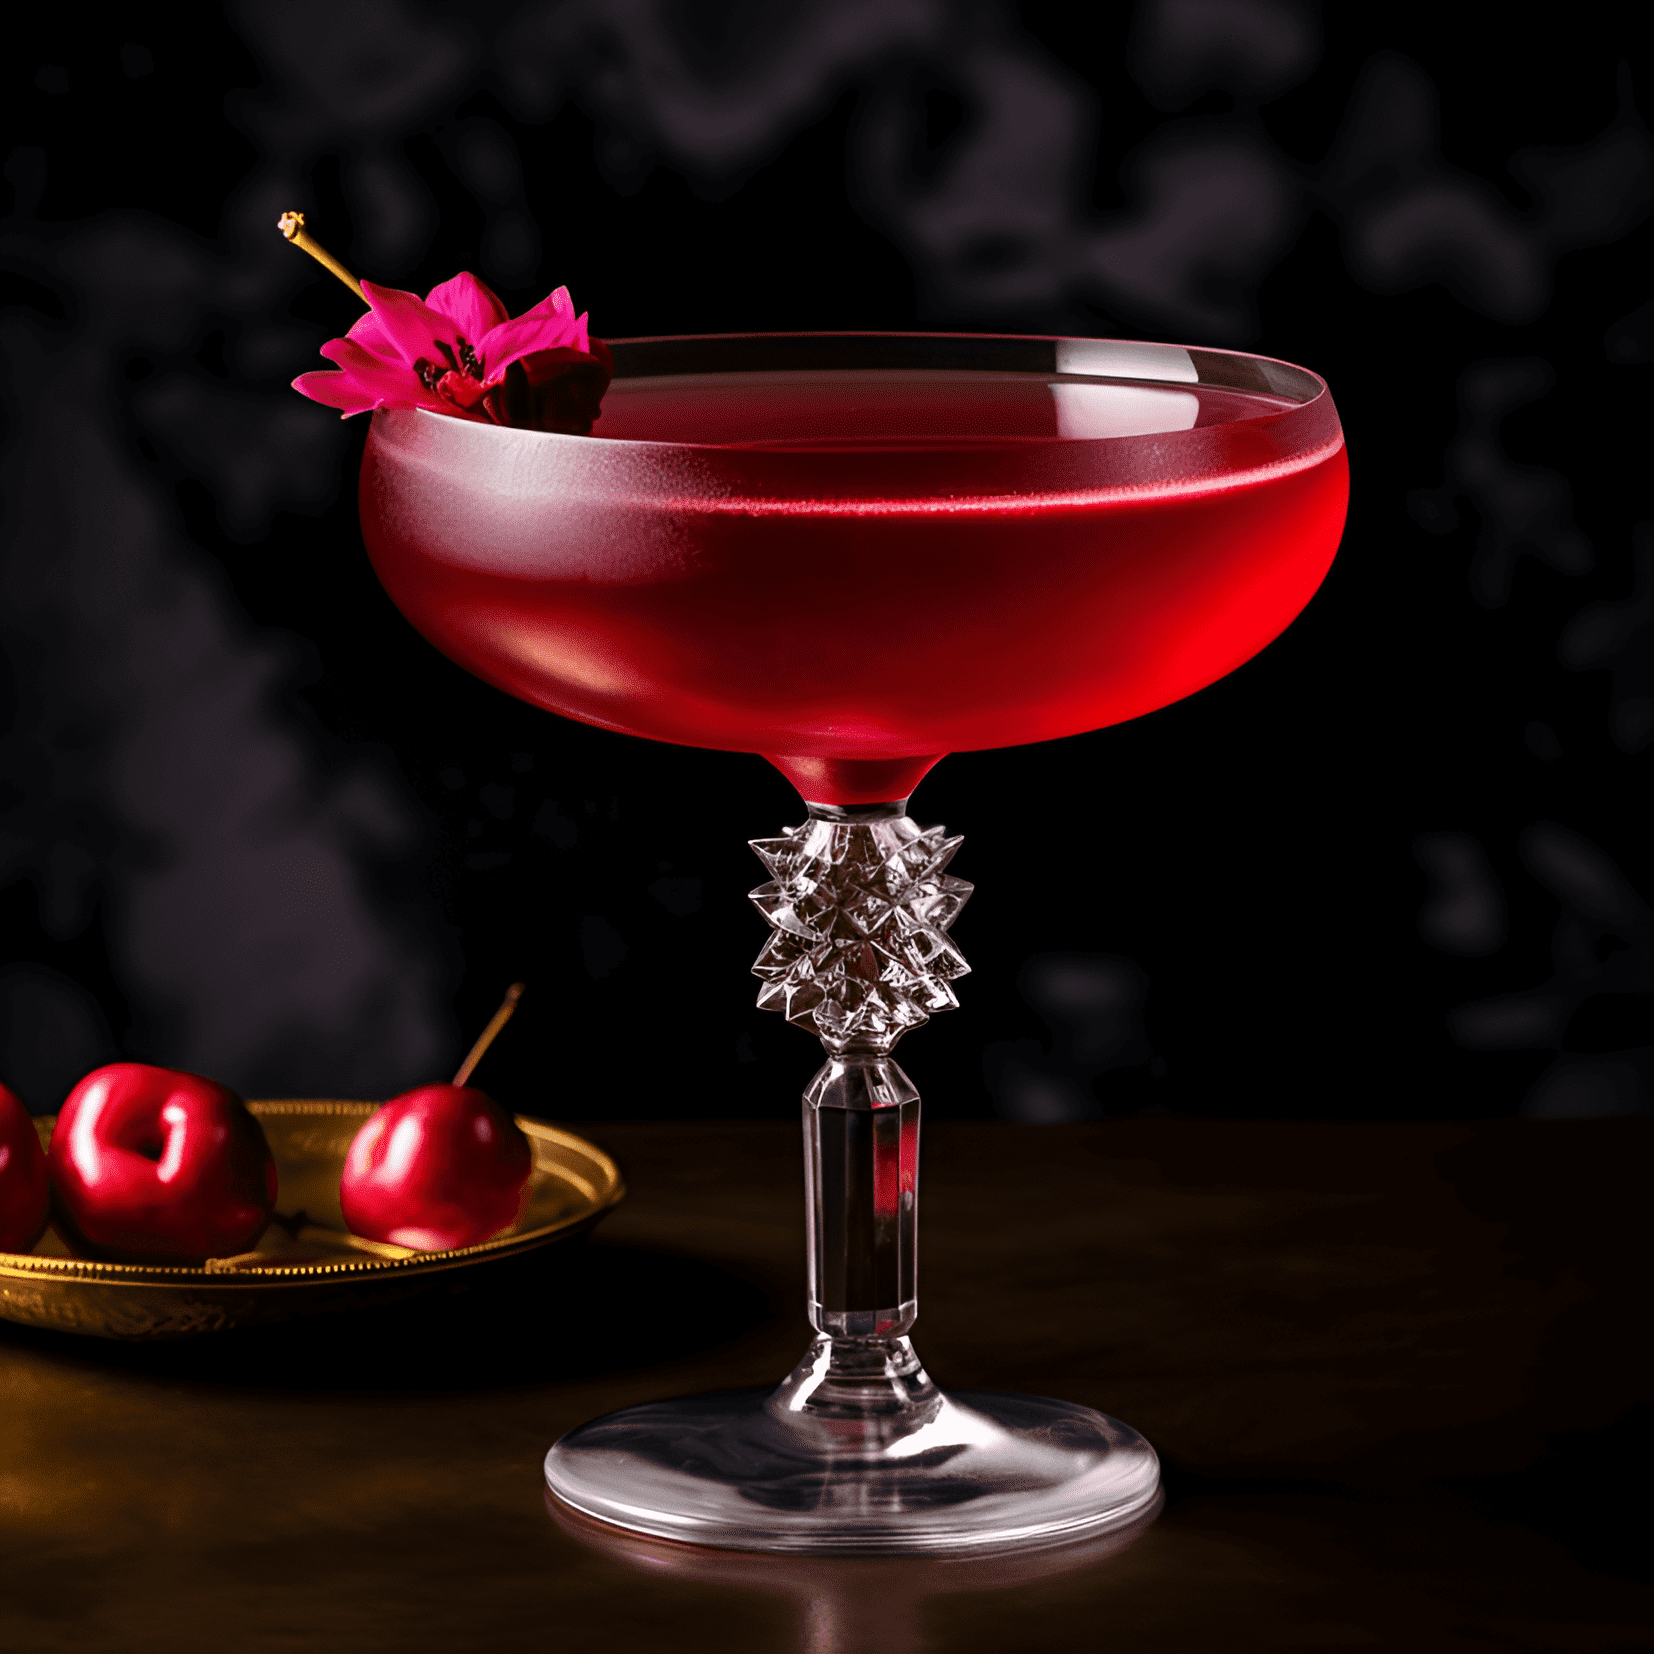 Forbidden Fruit Cocktail Recipe - The Forbidden Fruit cocktail is a delightful mix of sweet, sour, and slightly bitter flavors. It is a well-balanced drink with a smooth, velvety texture and a lingering, complex aftertaste.